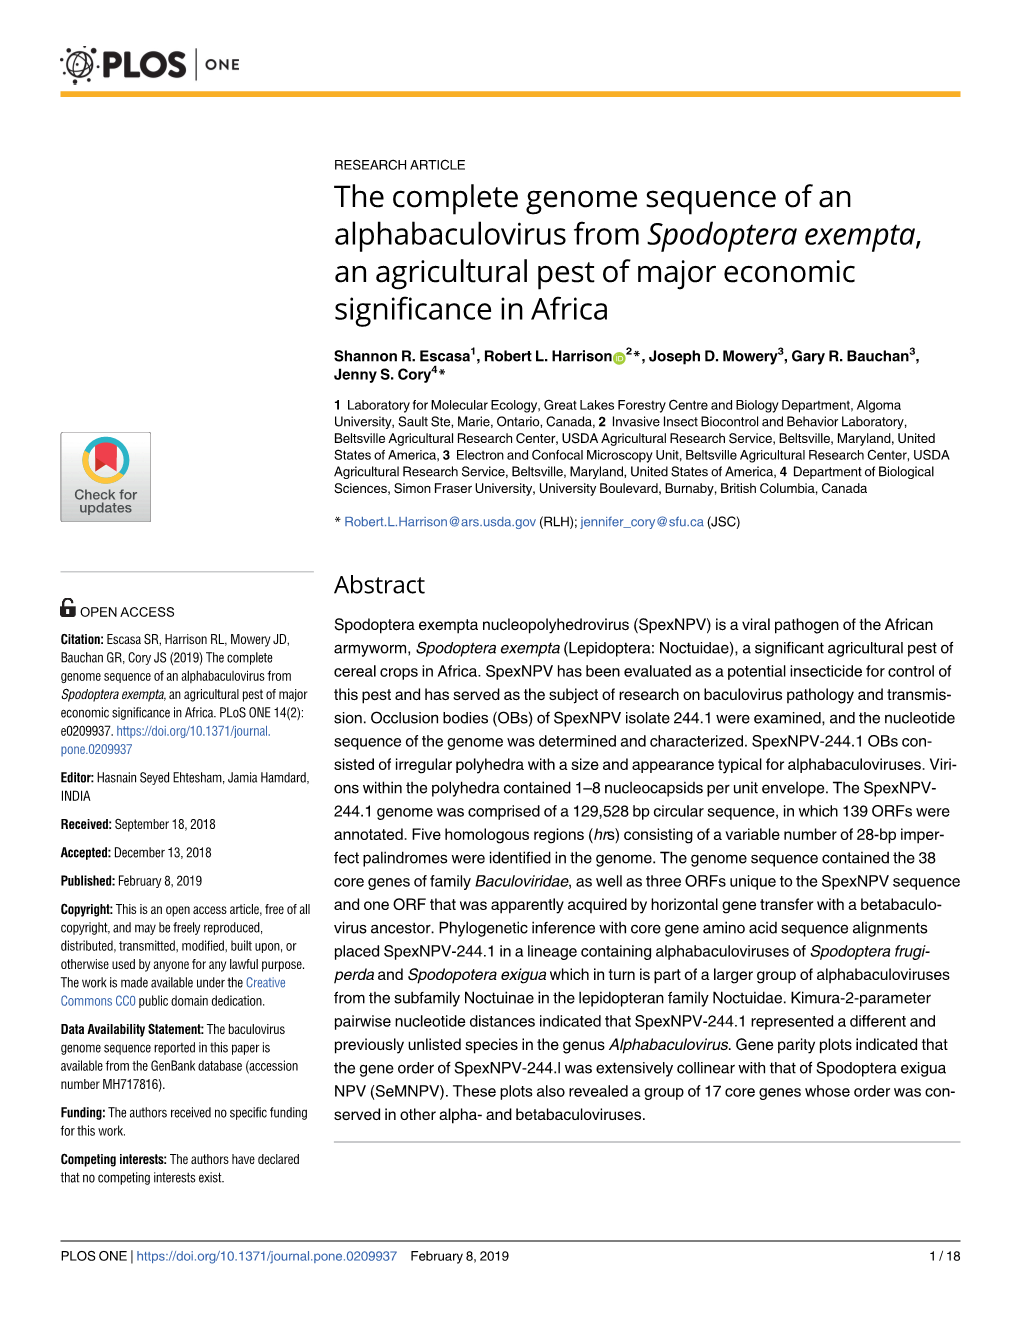 The Complete Genome Sequence of an Alphabaculovirus from Spodoptera Exempta, an Agricultural Pest of Major Economic Significance in Africa